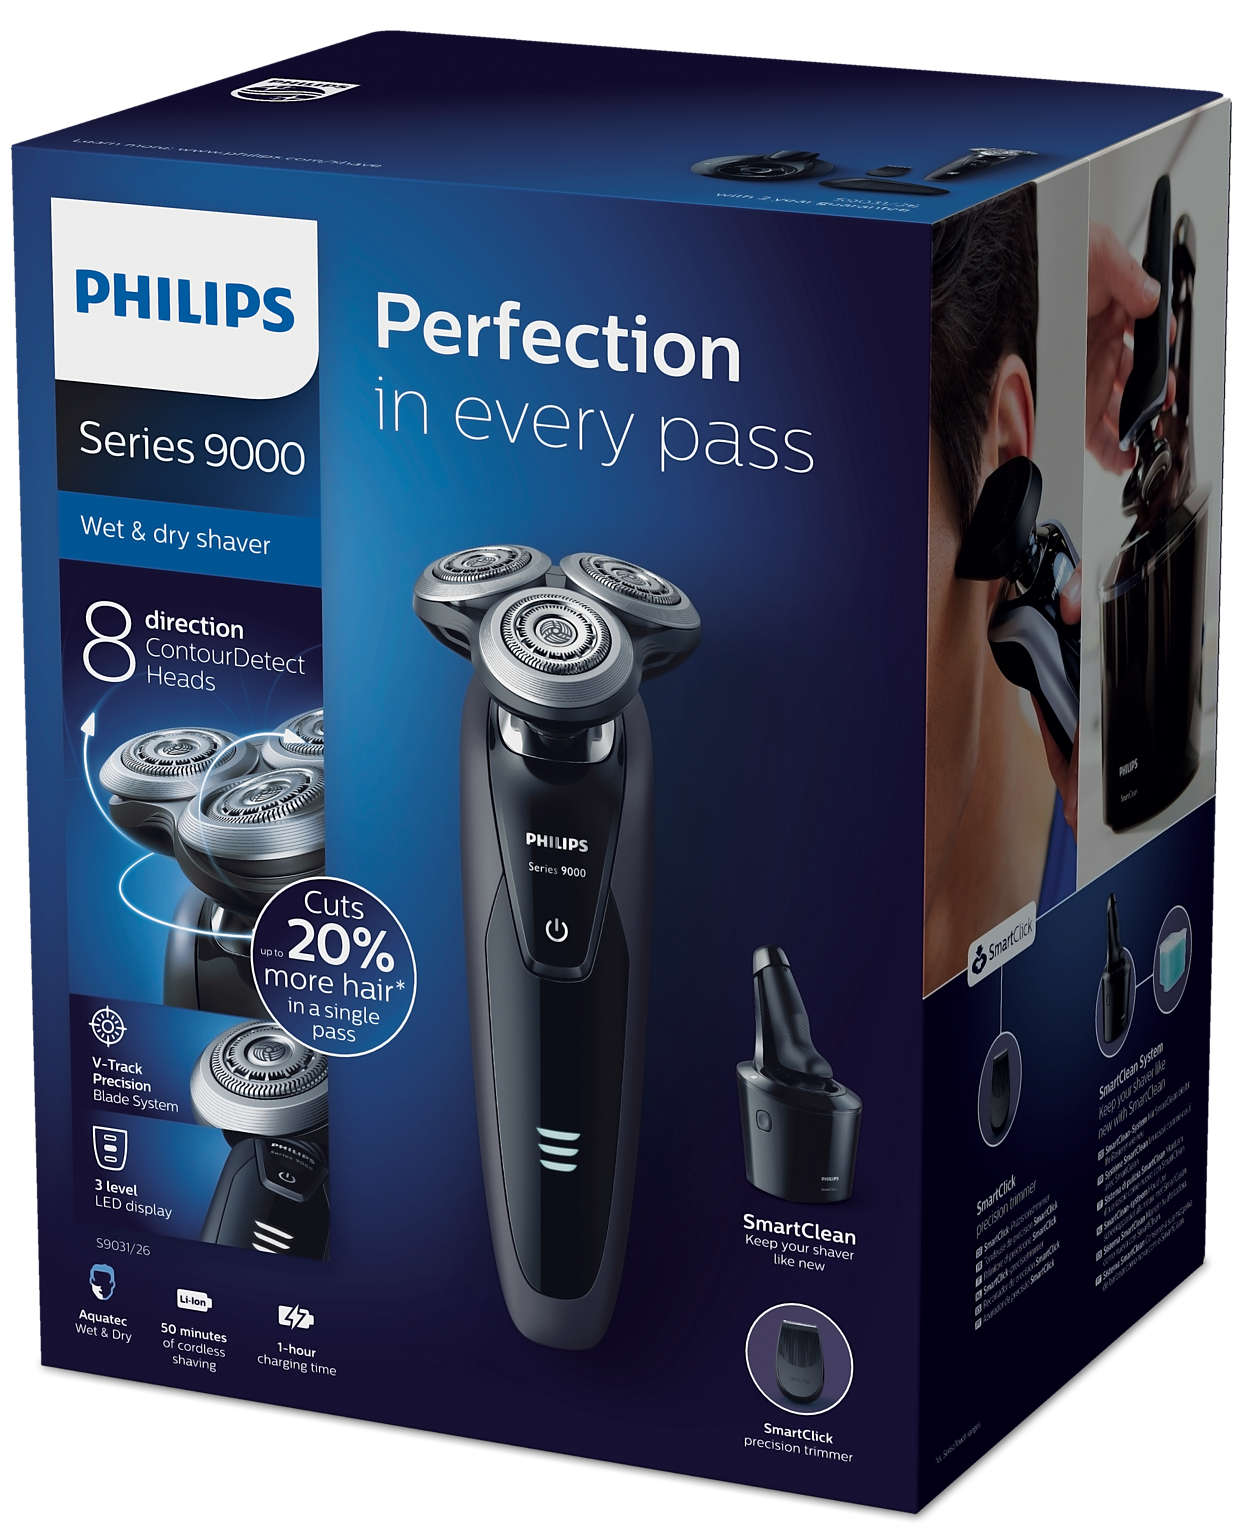 Shaver series 9000 Wet and dry electric shaver S9031/26 | Philips